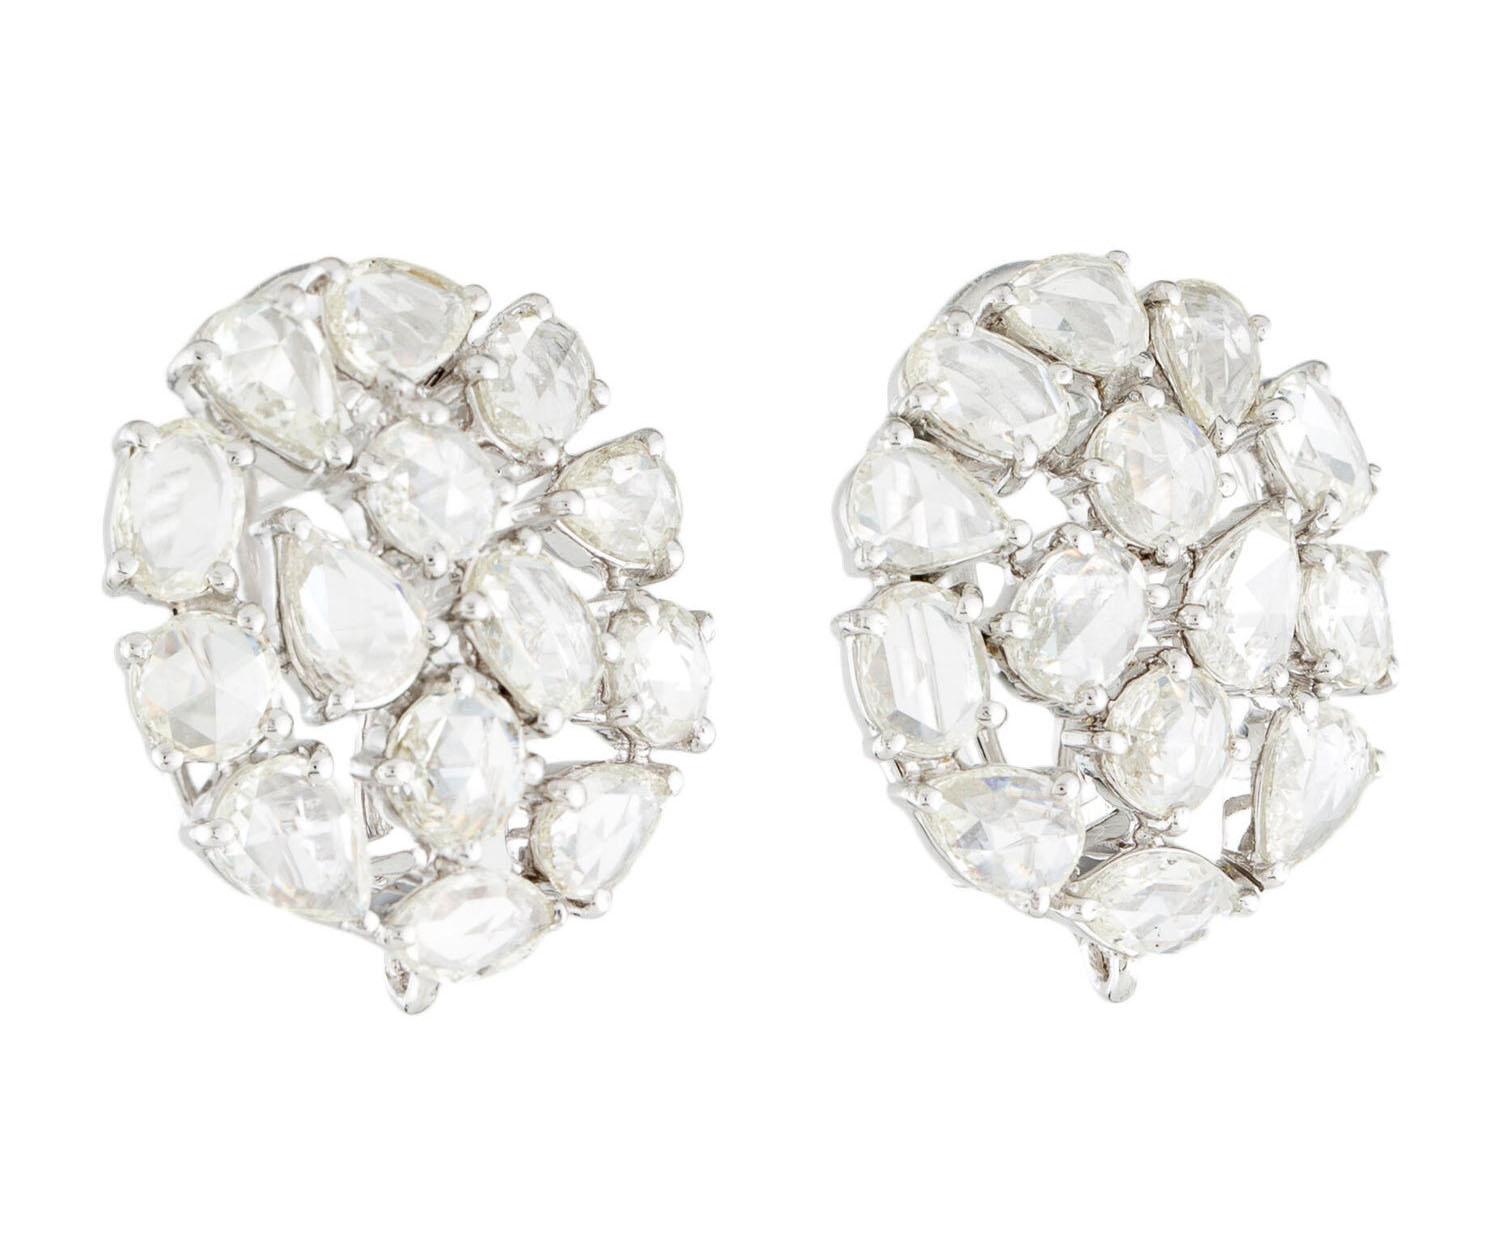 A pair of beautiful Diamond Rose Cut Round Earrings in 18K White Gold. The earrings are very light-weight and look great with any outfit. The length is 0.85